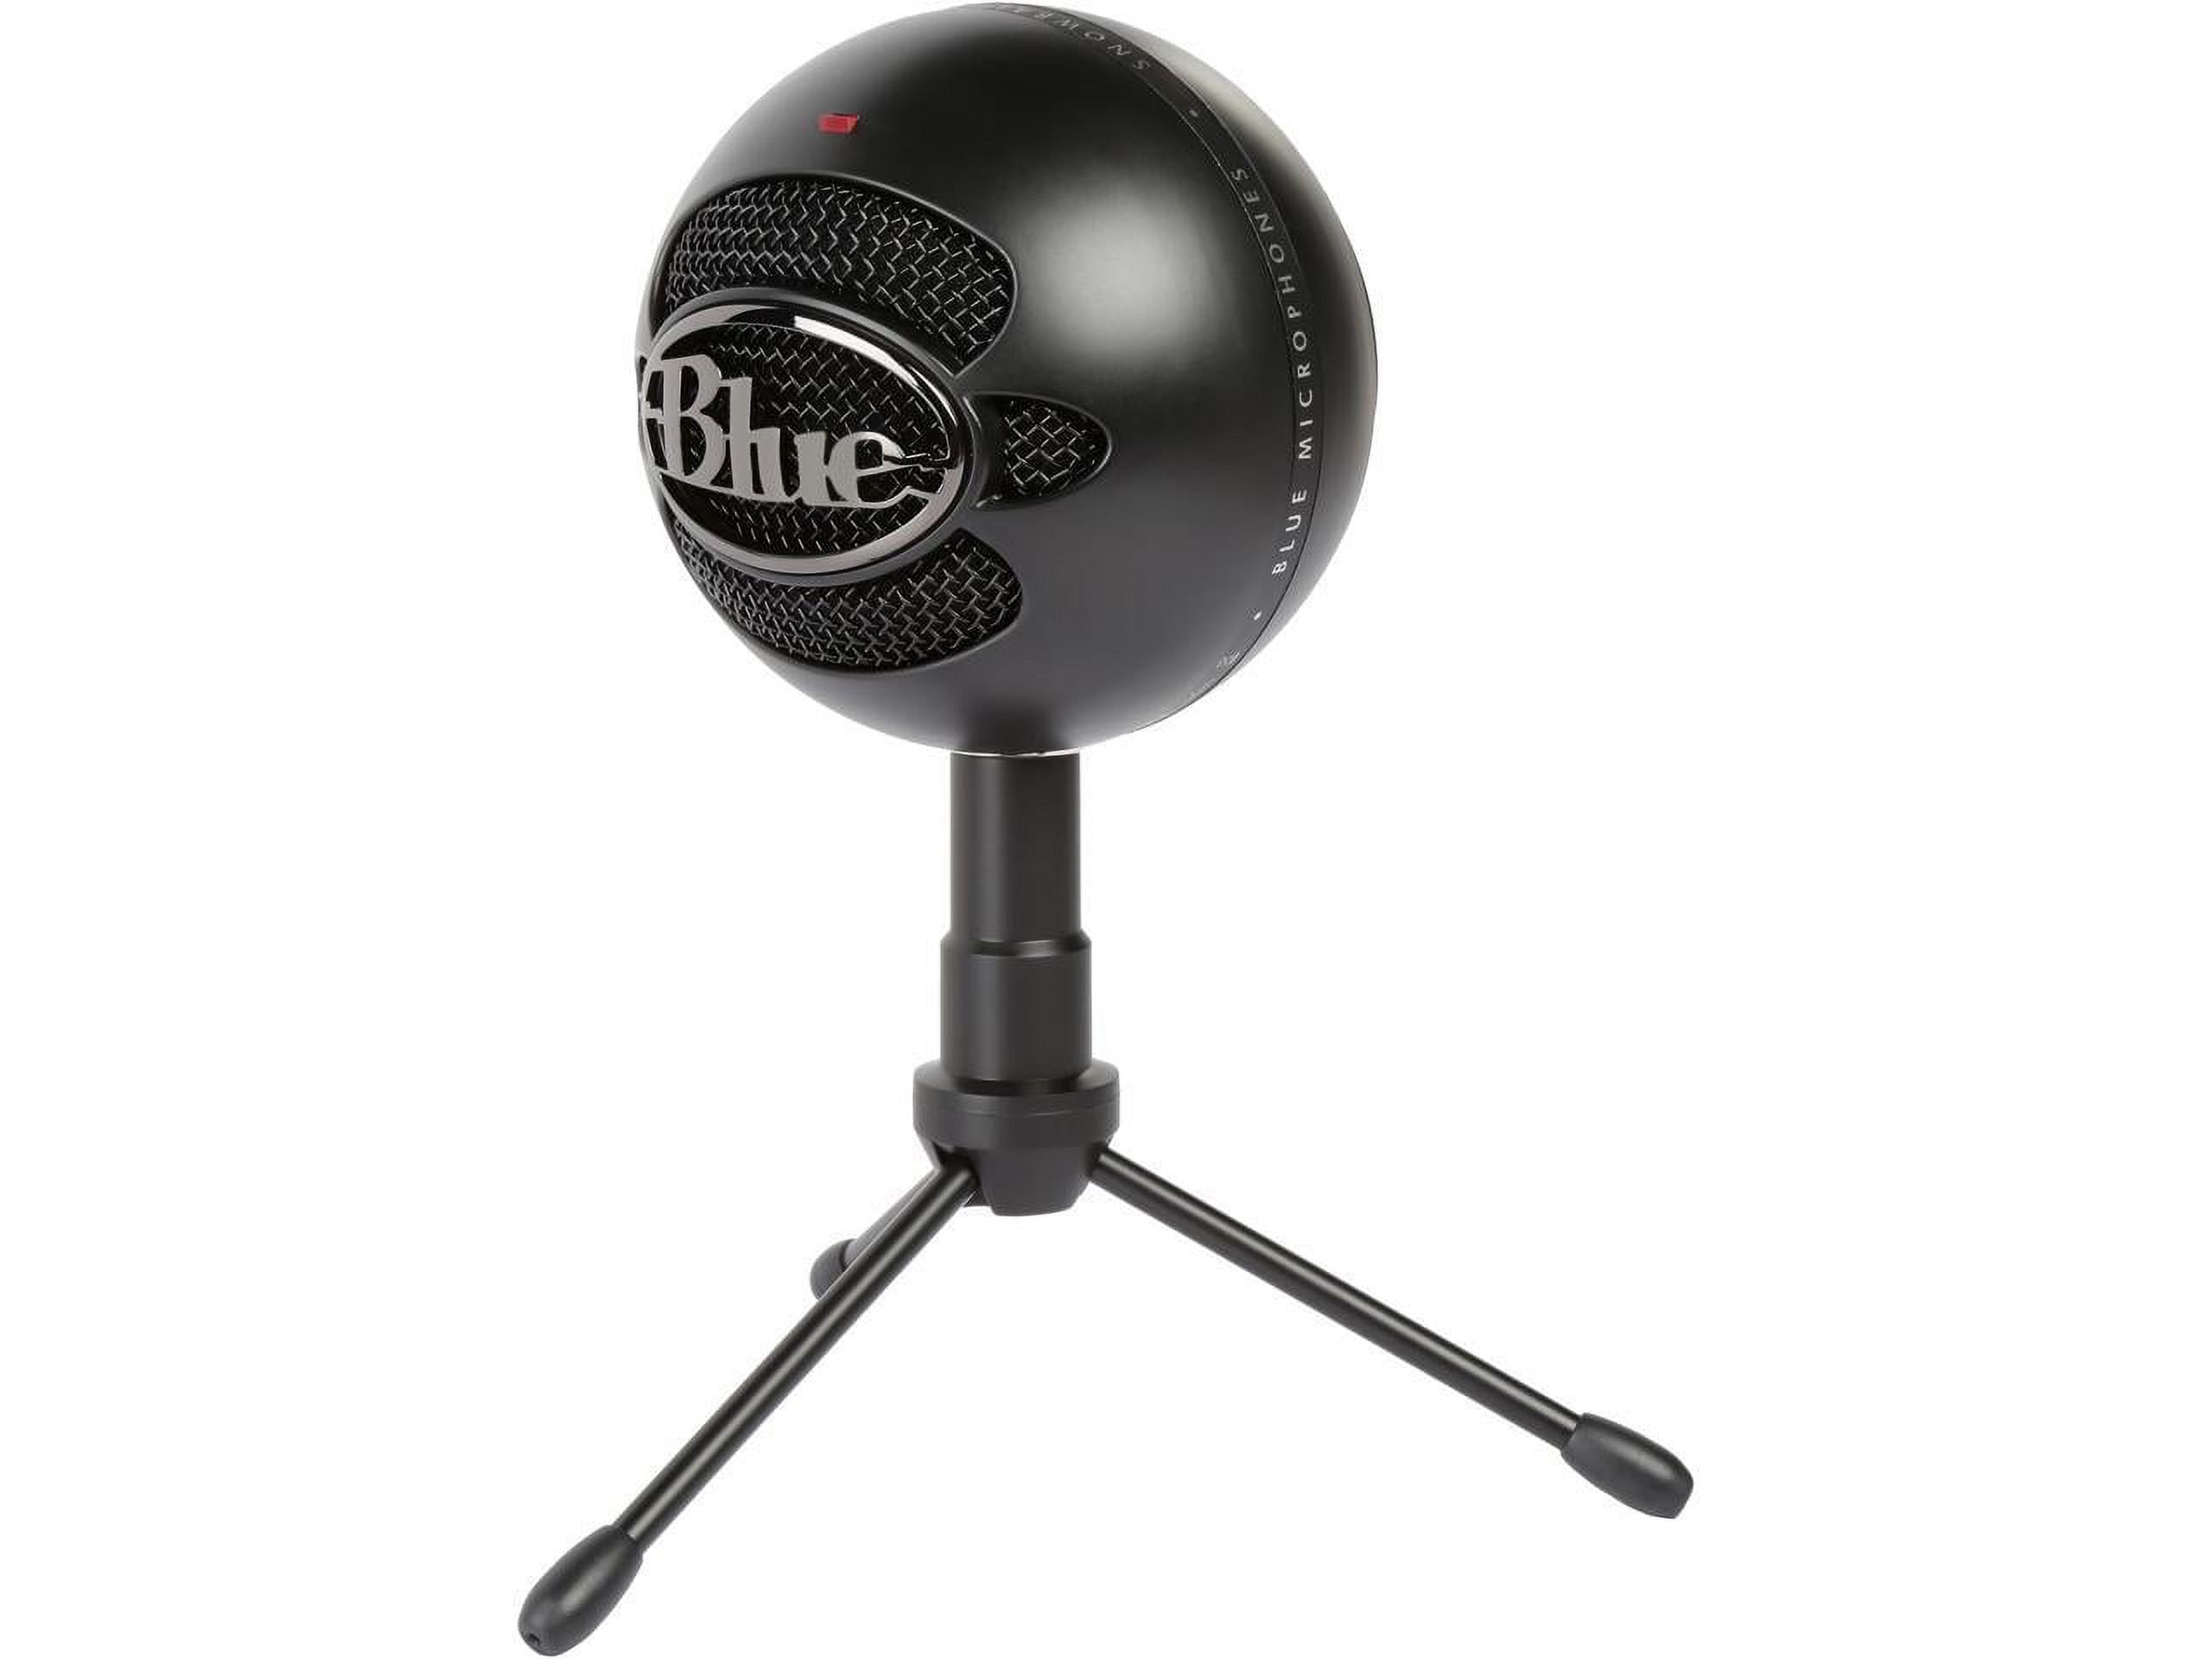 Blue Snowball iCE USB Microphone for PC, Mac, Gaming, Recording, Streaming, Podcasting, with Cardioid Condenser Mic Capsule, Adjustable Desktop Stand and USB cable, Plug 'n Play – Black - image 1 of 6